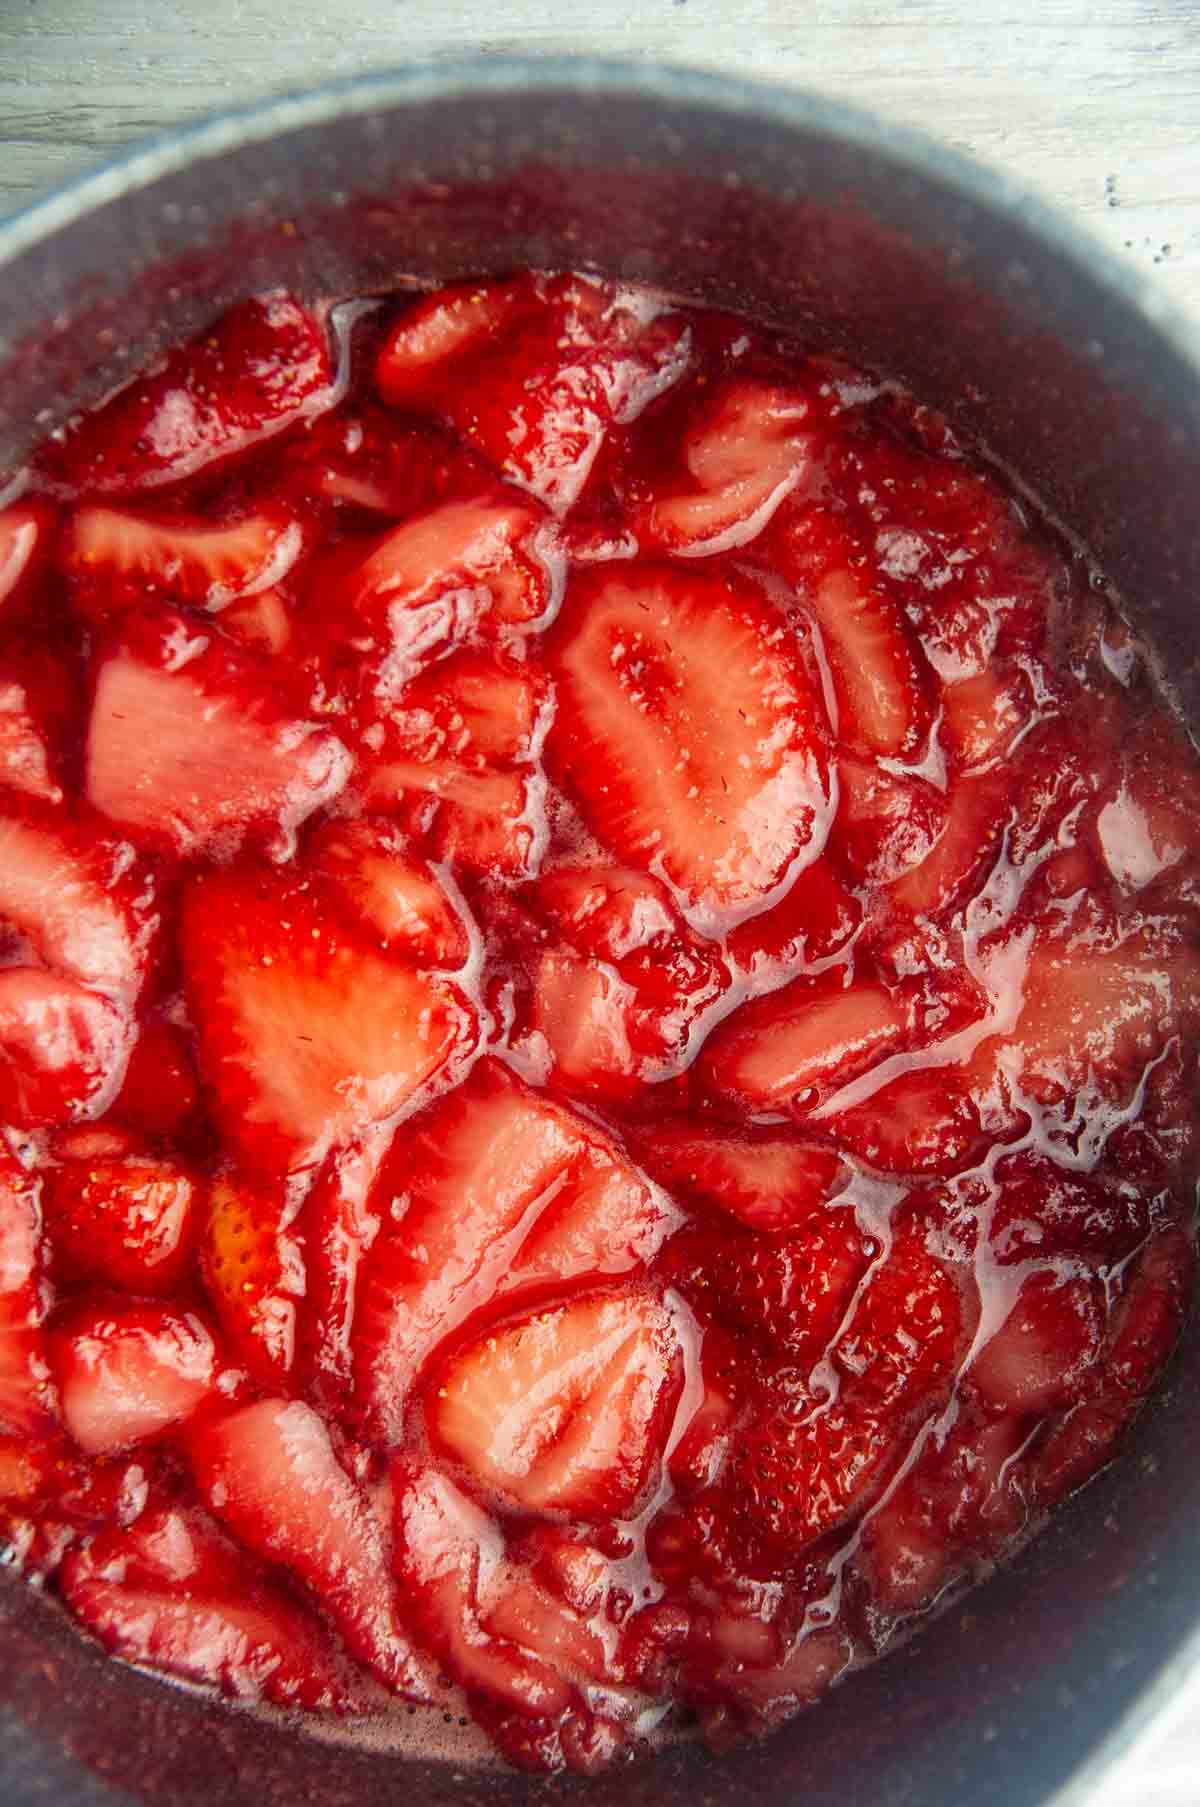 Cook the strawberries, sugar, and lemon juice until the strawberries give off liquid.